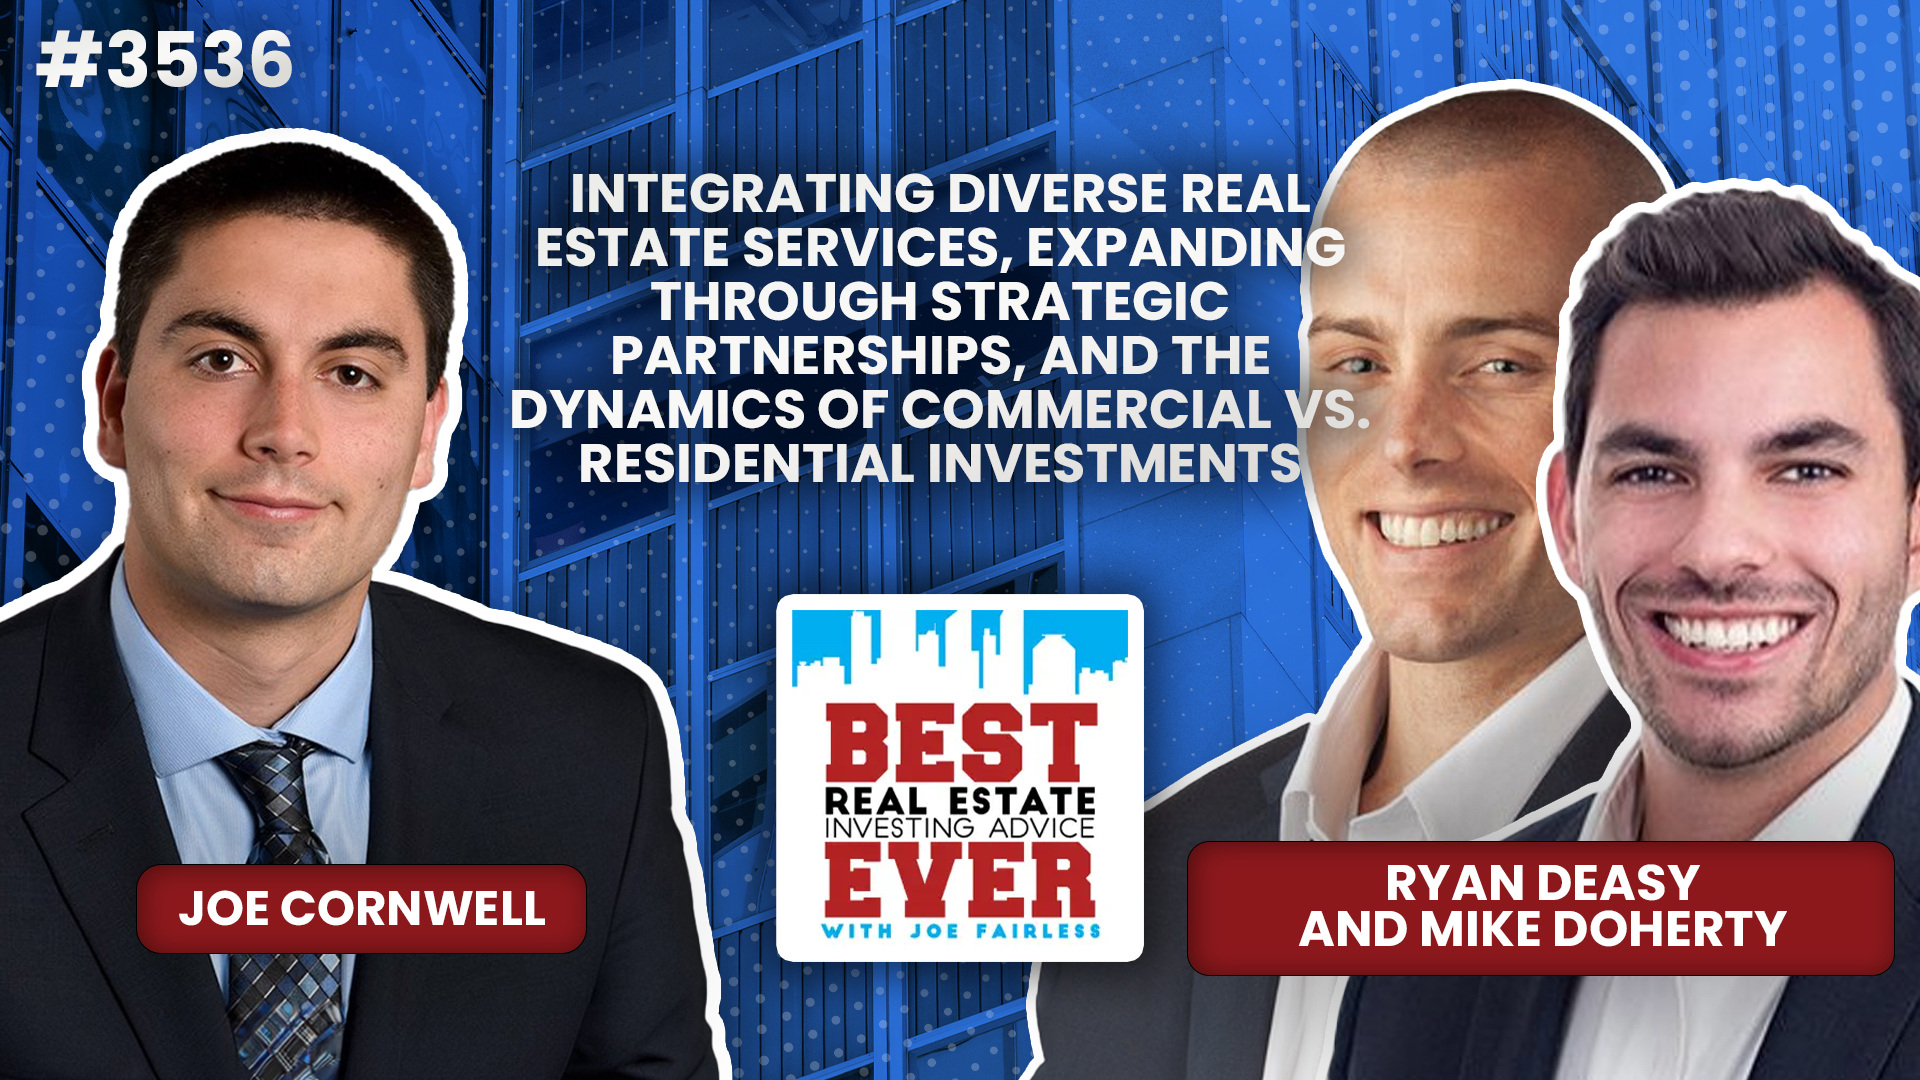 JF3536: Integrating Diverse Real Estate Services, Expanding Through Strategic Partnerships, and the Dynamics of Commercial vs. Residential Investments ft. Ryan Deasy and Mike Doherty